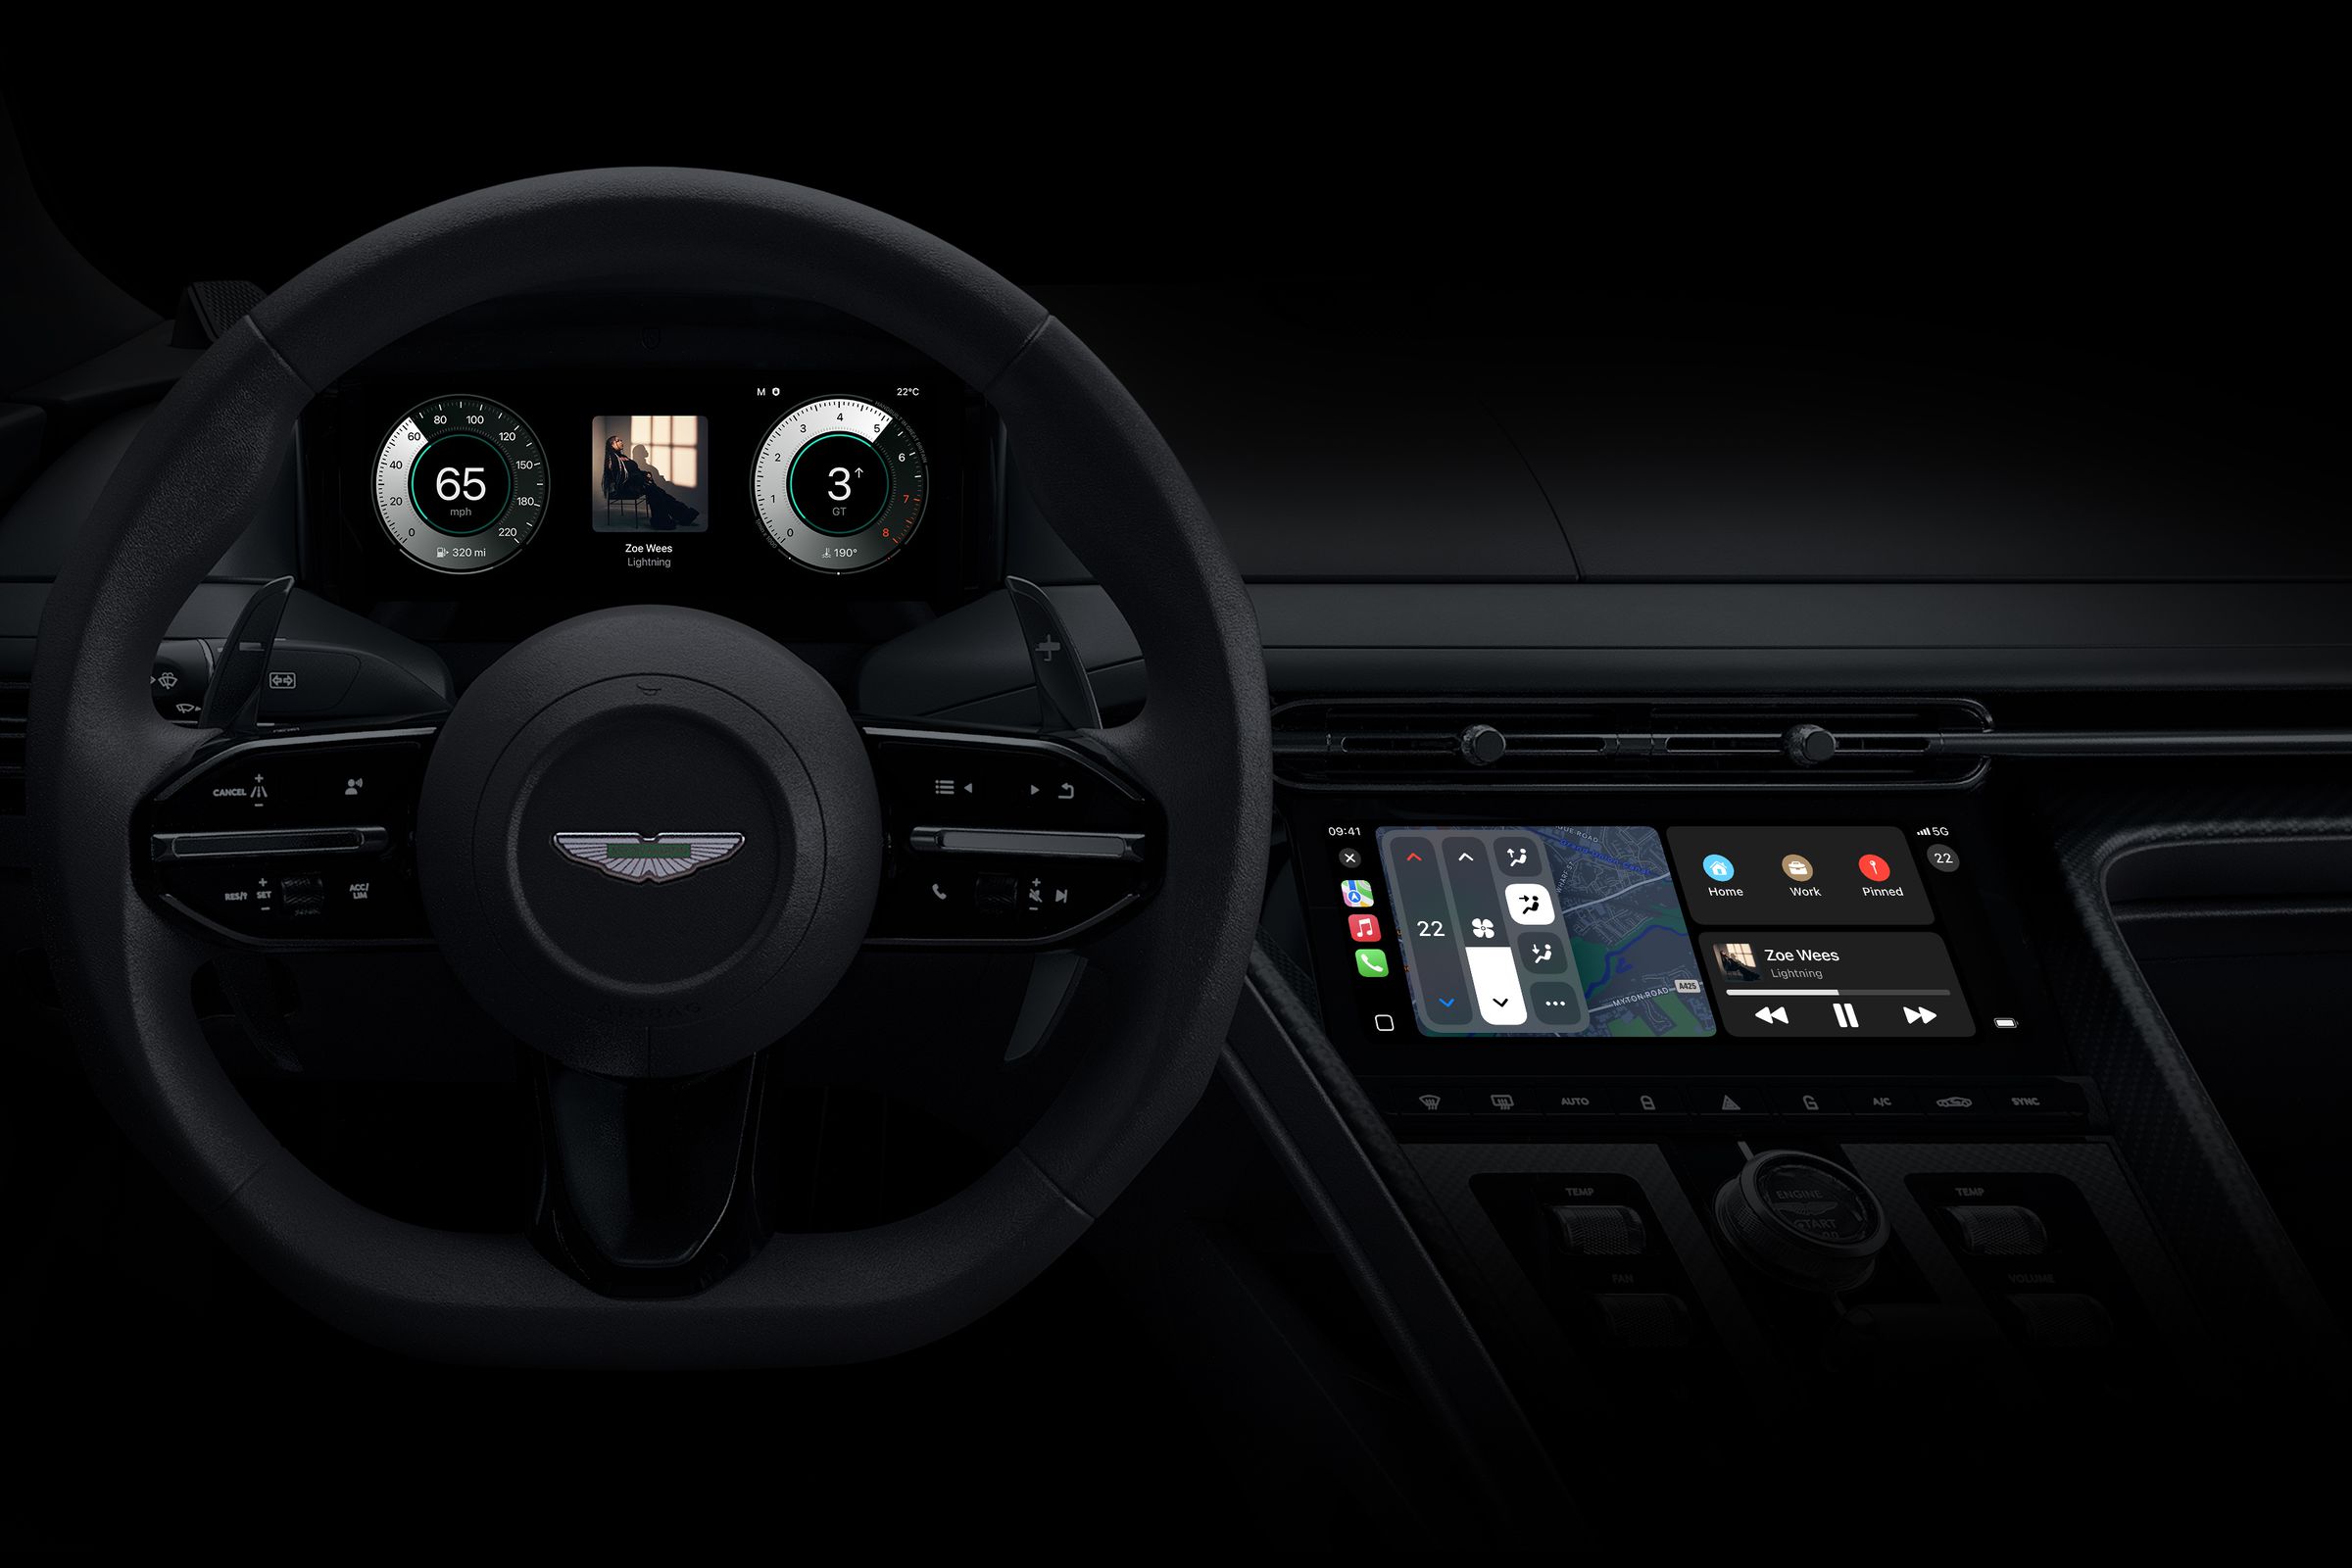 Simulated image of Apple CarPlay in-car setup from Aston Martin, controlling the in-dash display and infotainment center.